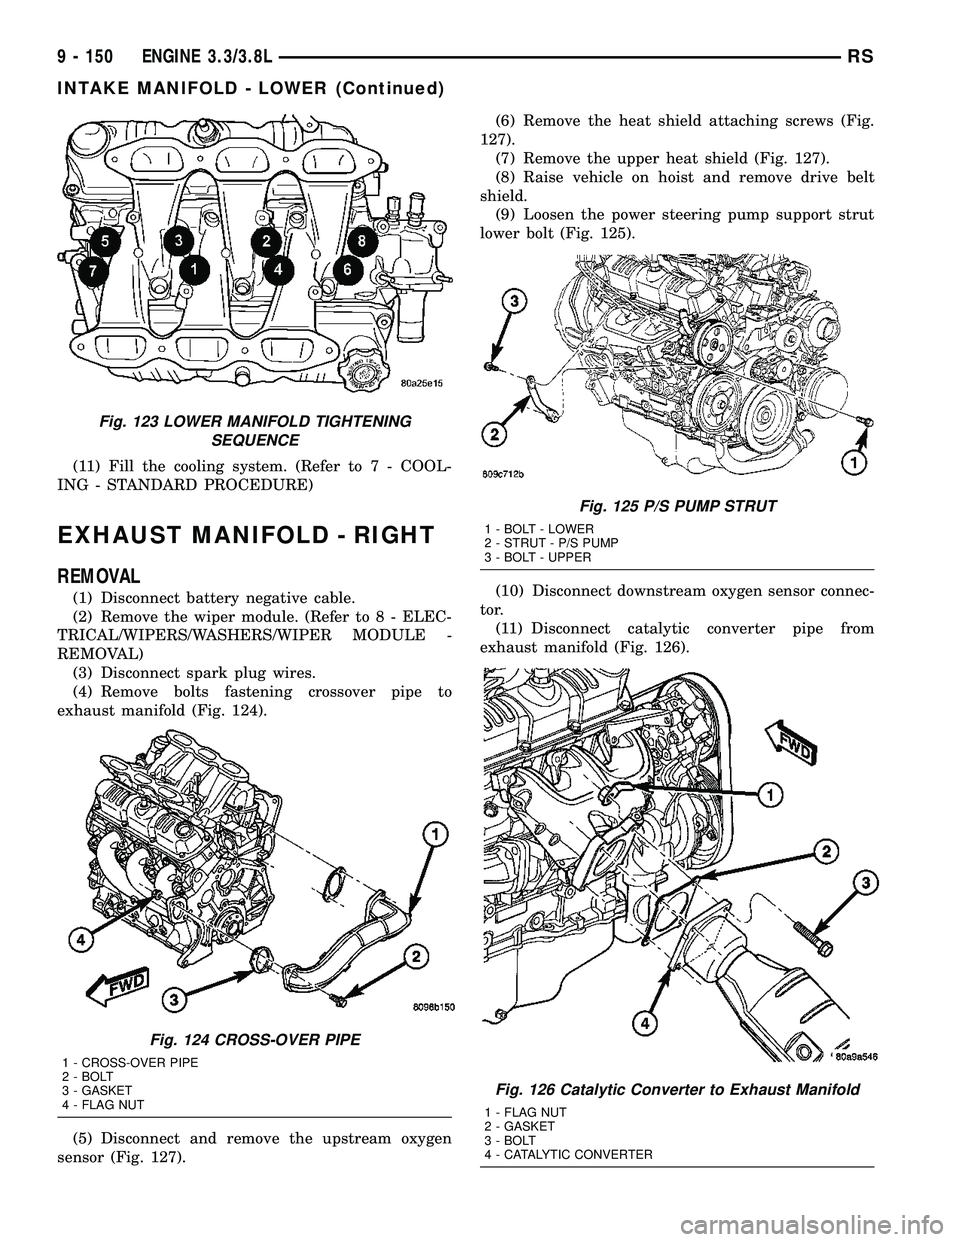 CHRYSLER VOYAGER 2004  Service Manual (11) Fill the cooling system. (Refer to 7 - COOL-
ING - STANDARD PROCEDURE)
EXHAUST MANIFOLD - RIGHT
REMOVAL
(1) Disconnect battery negative cable.
(2) Remove the wiper module. (Refer to 8 - ELEC-
TRI